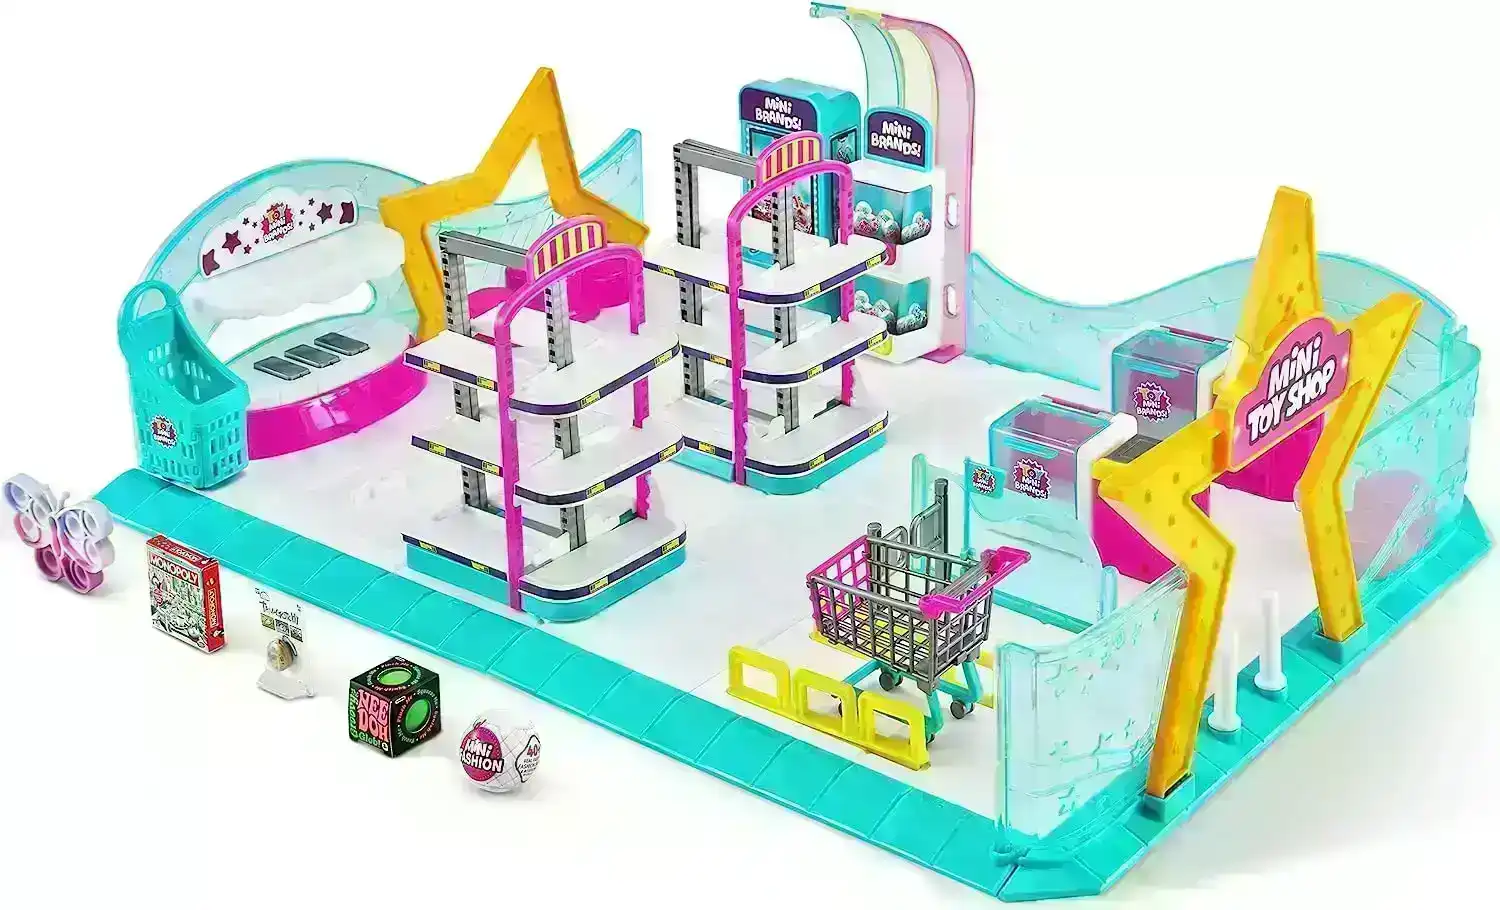 5 Surprise Toy Mini Brands Toy Shop Playset, Toymate